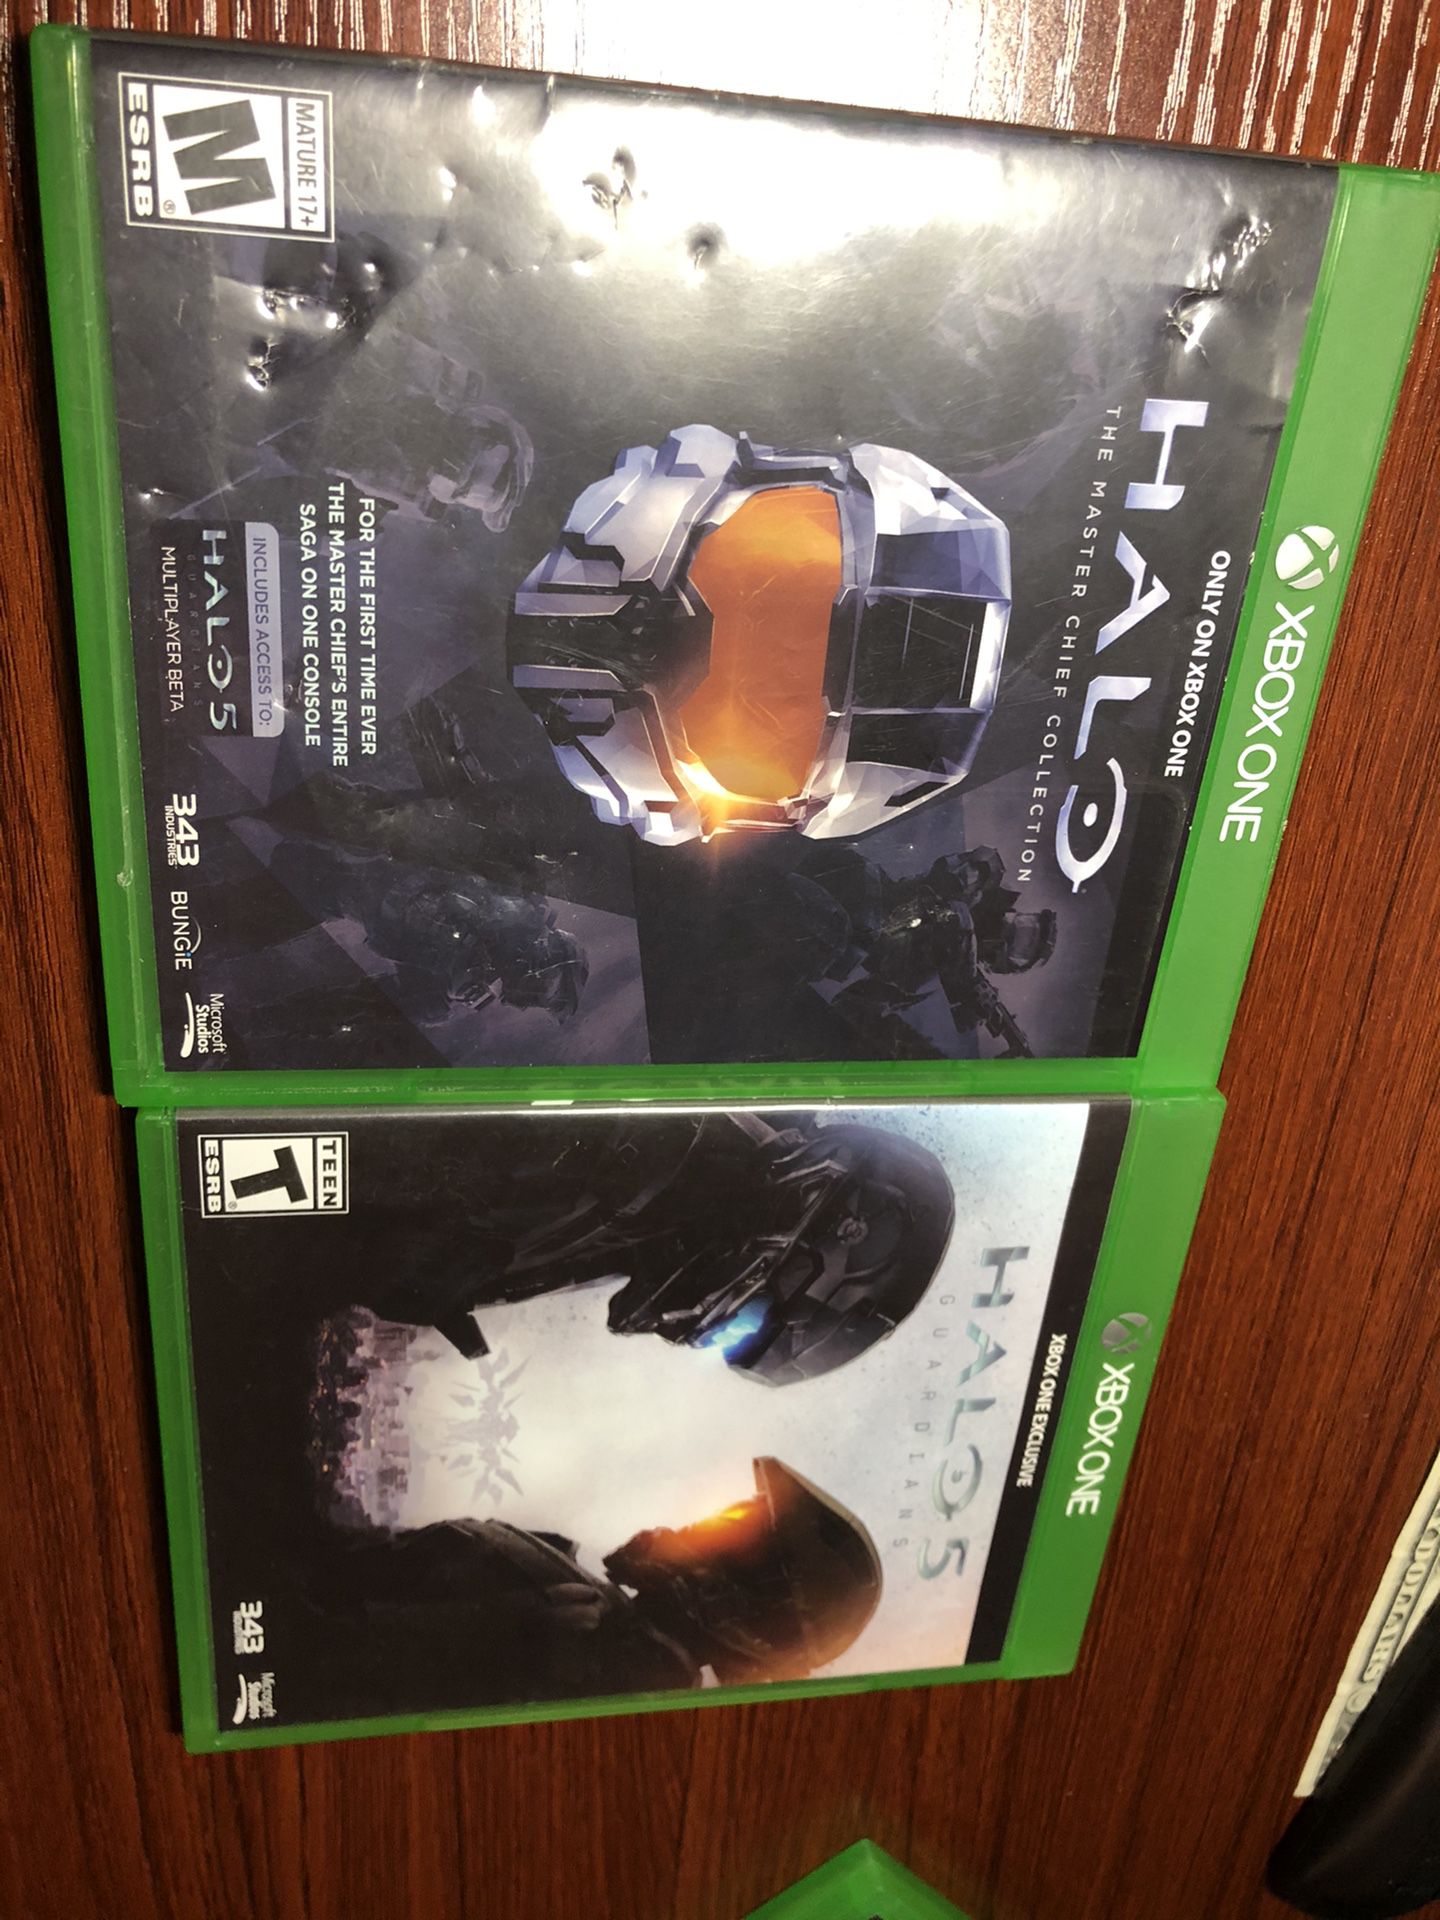 Halo Master Chief collection/Halo 5 (Xbox One)